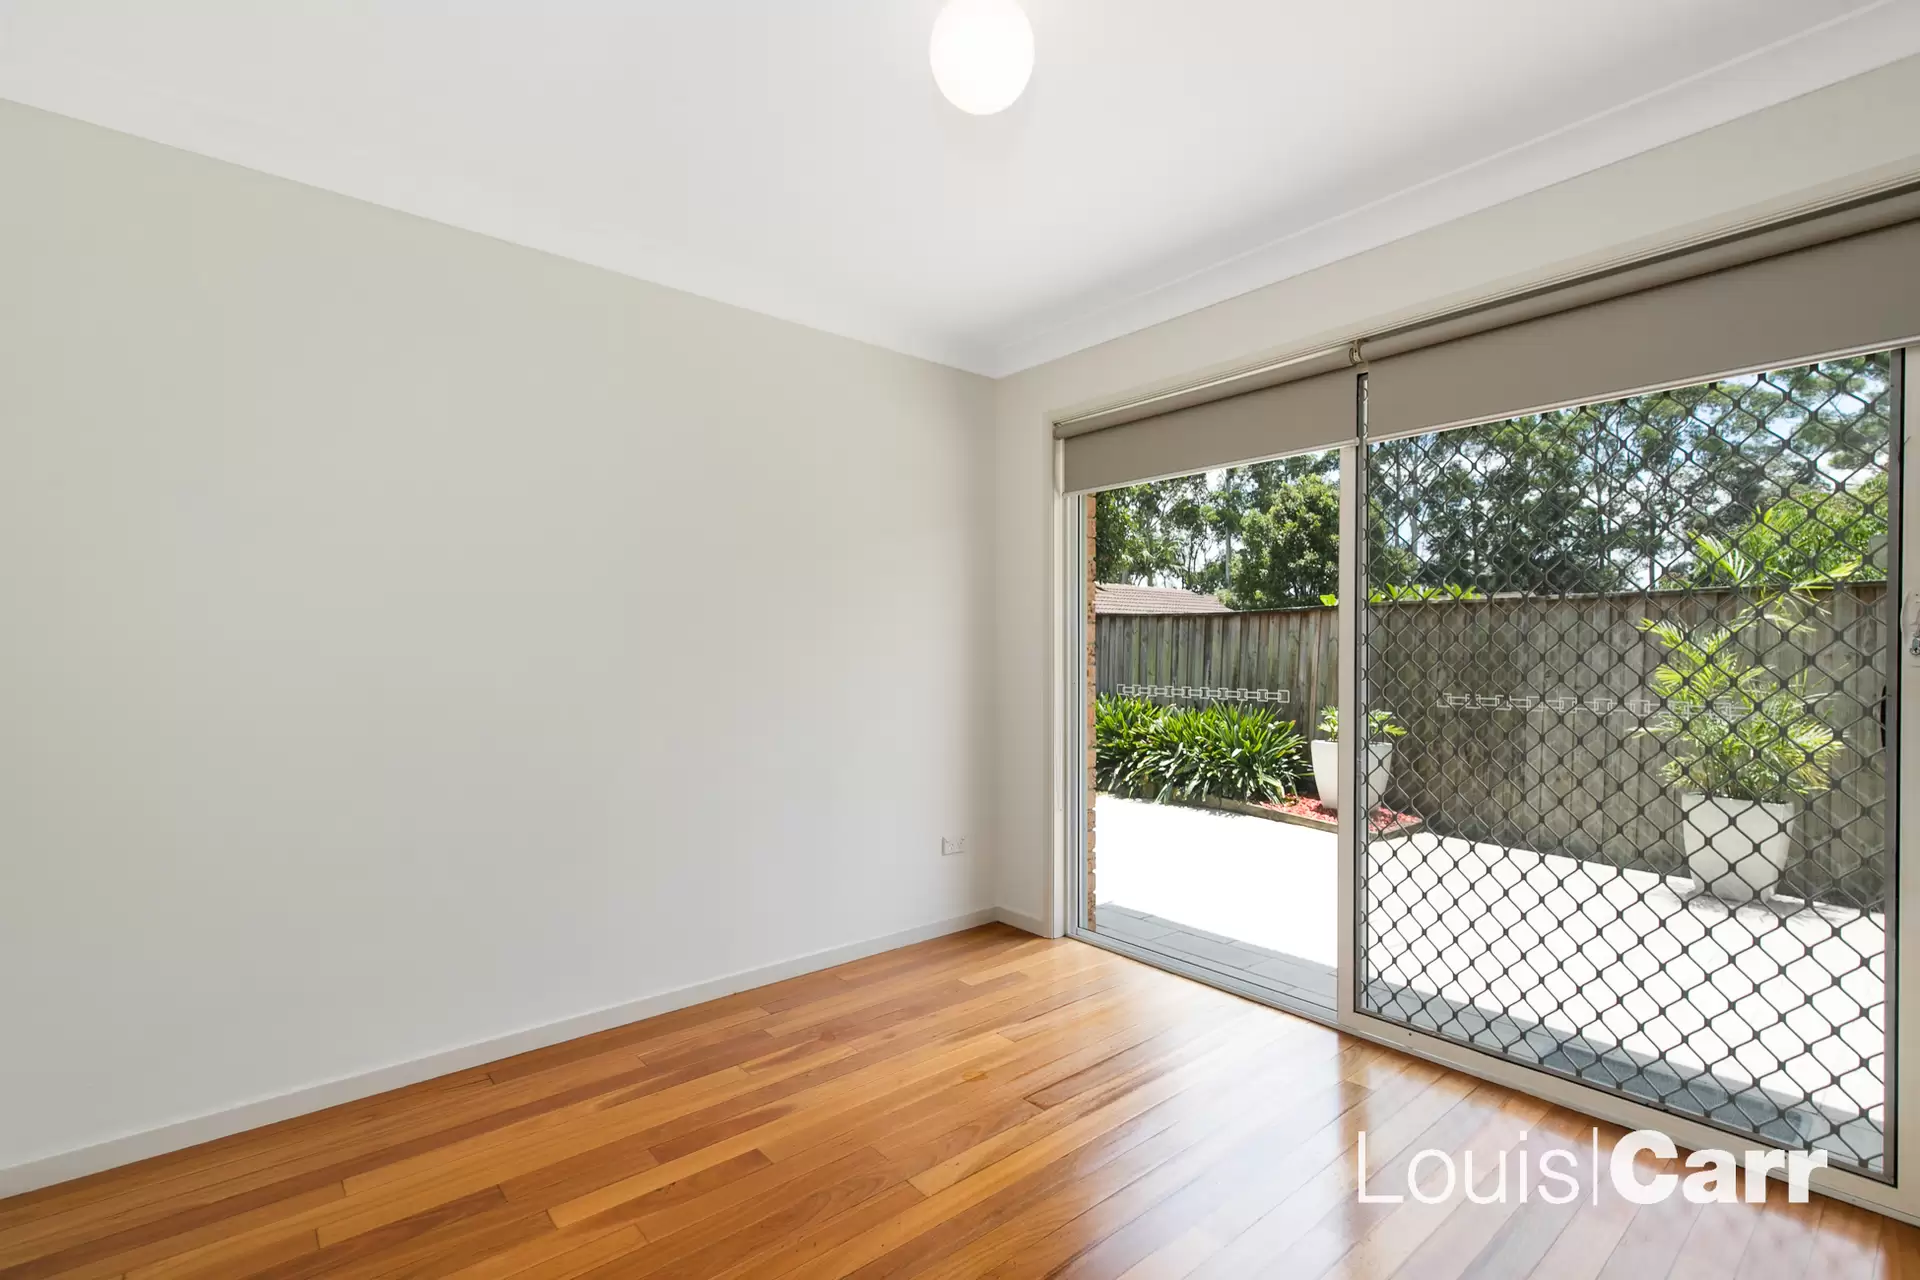 Photo #4: 32/45 Edward Bennett Drive, Cherrybrook - For Lease by Louis Carr Real Estate